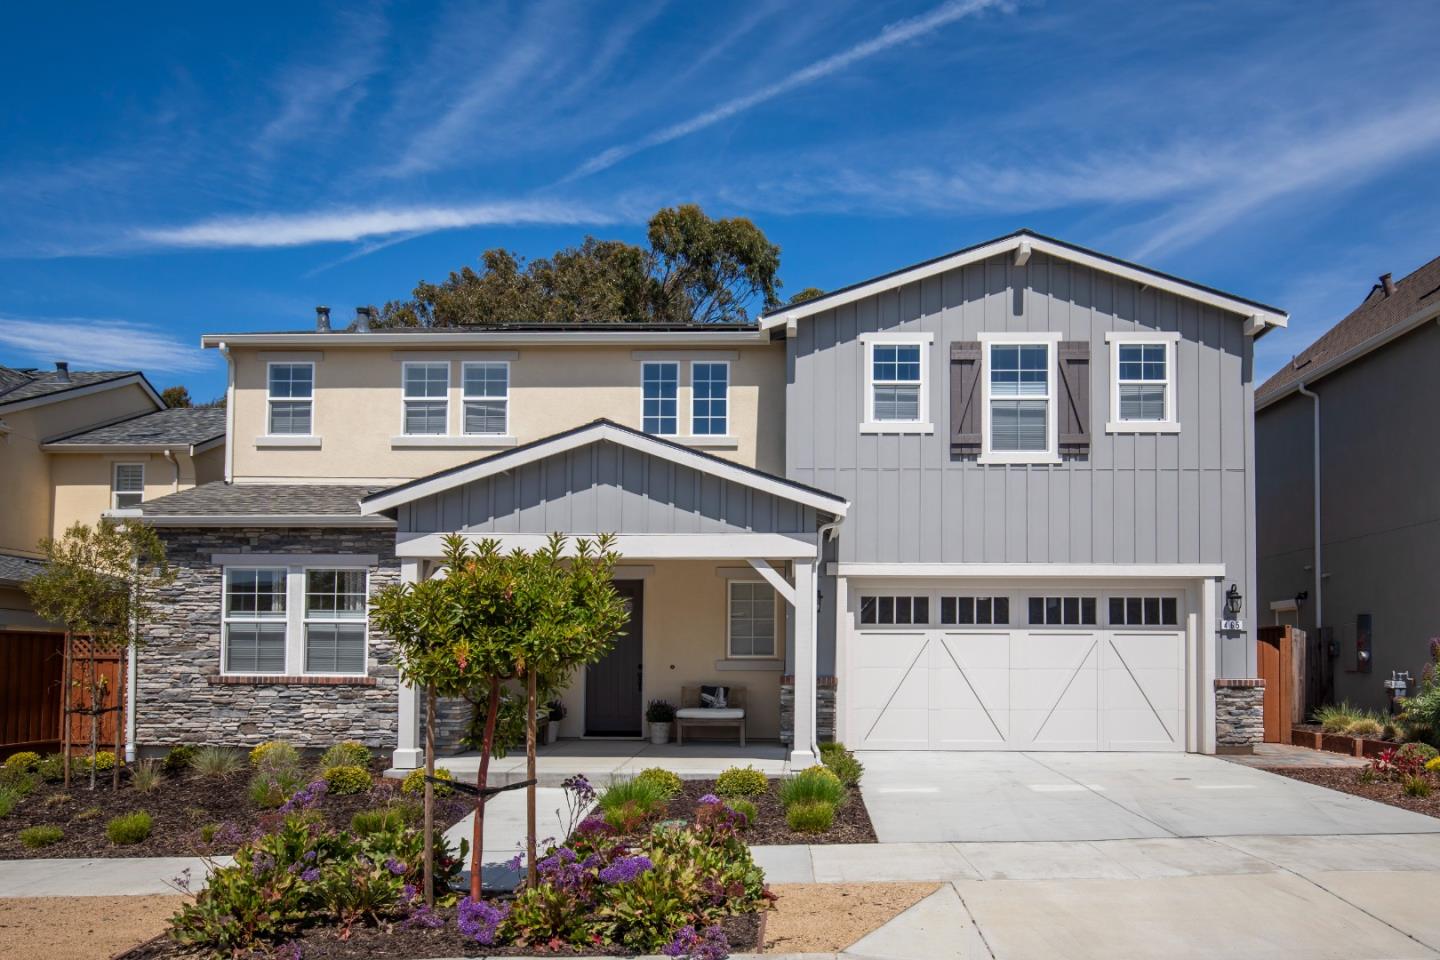 Photo of 465 Russell Wy in Marina, CA